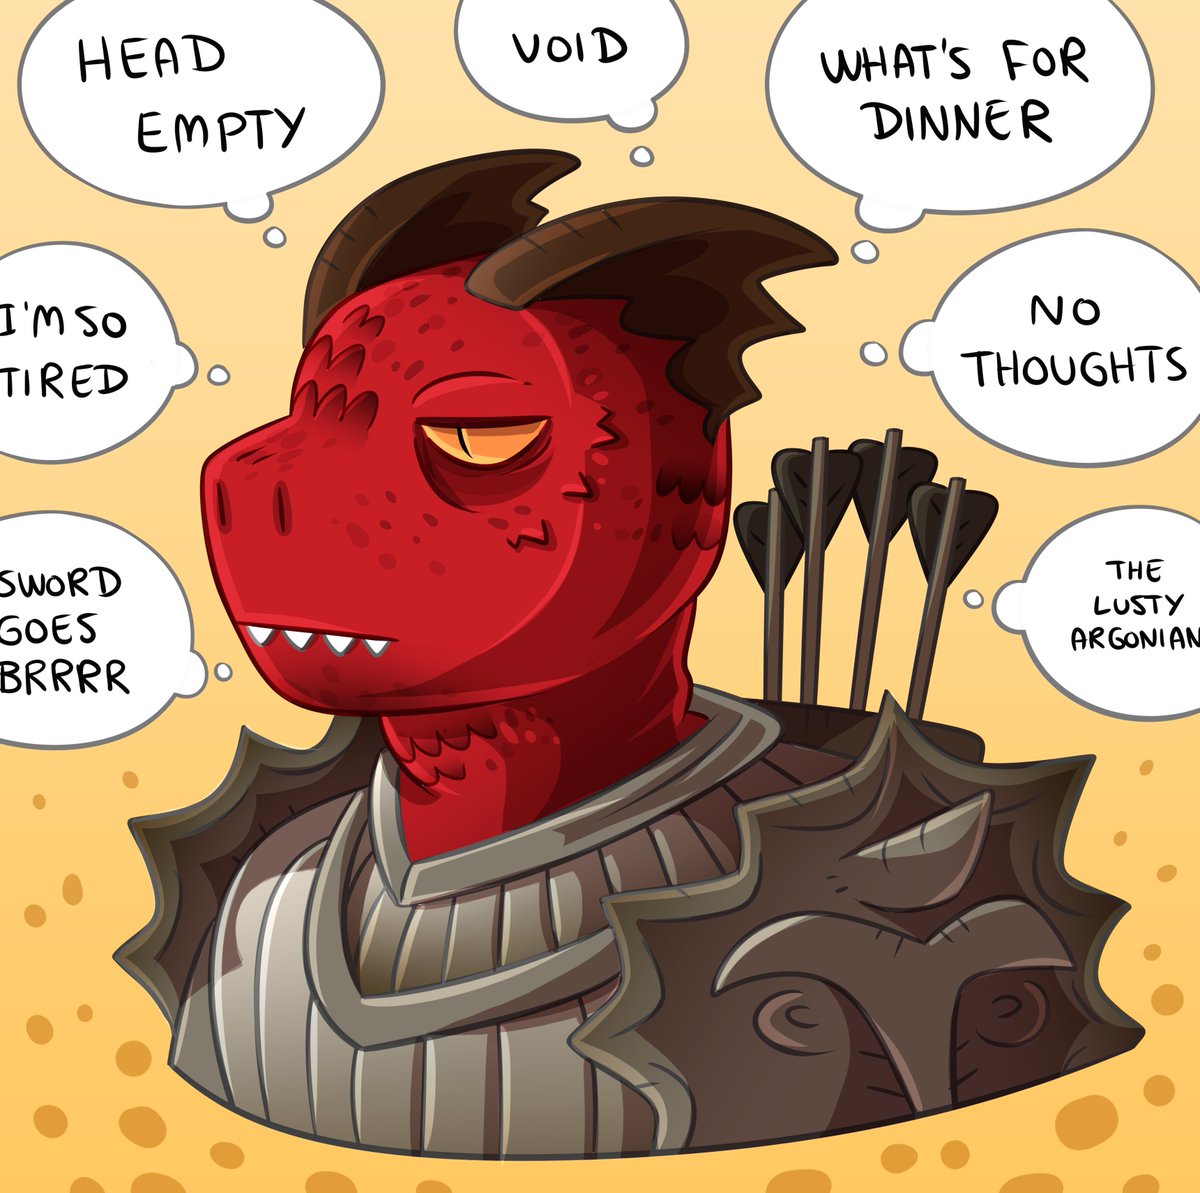 Here's Glorg, my argonian in Elder Scrolls Oblivion.

He goes on goofy adventures around the lands, and just doesn't give a shit about everything. 